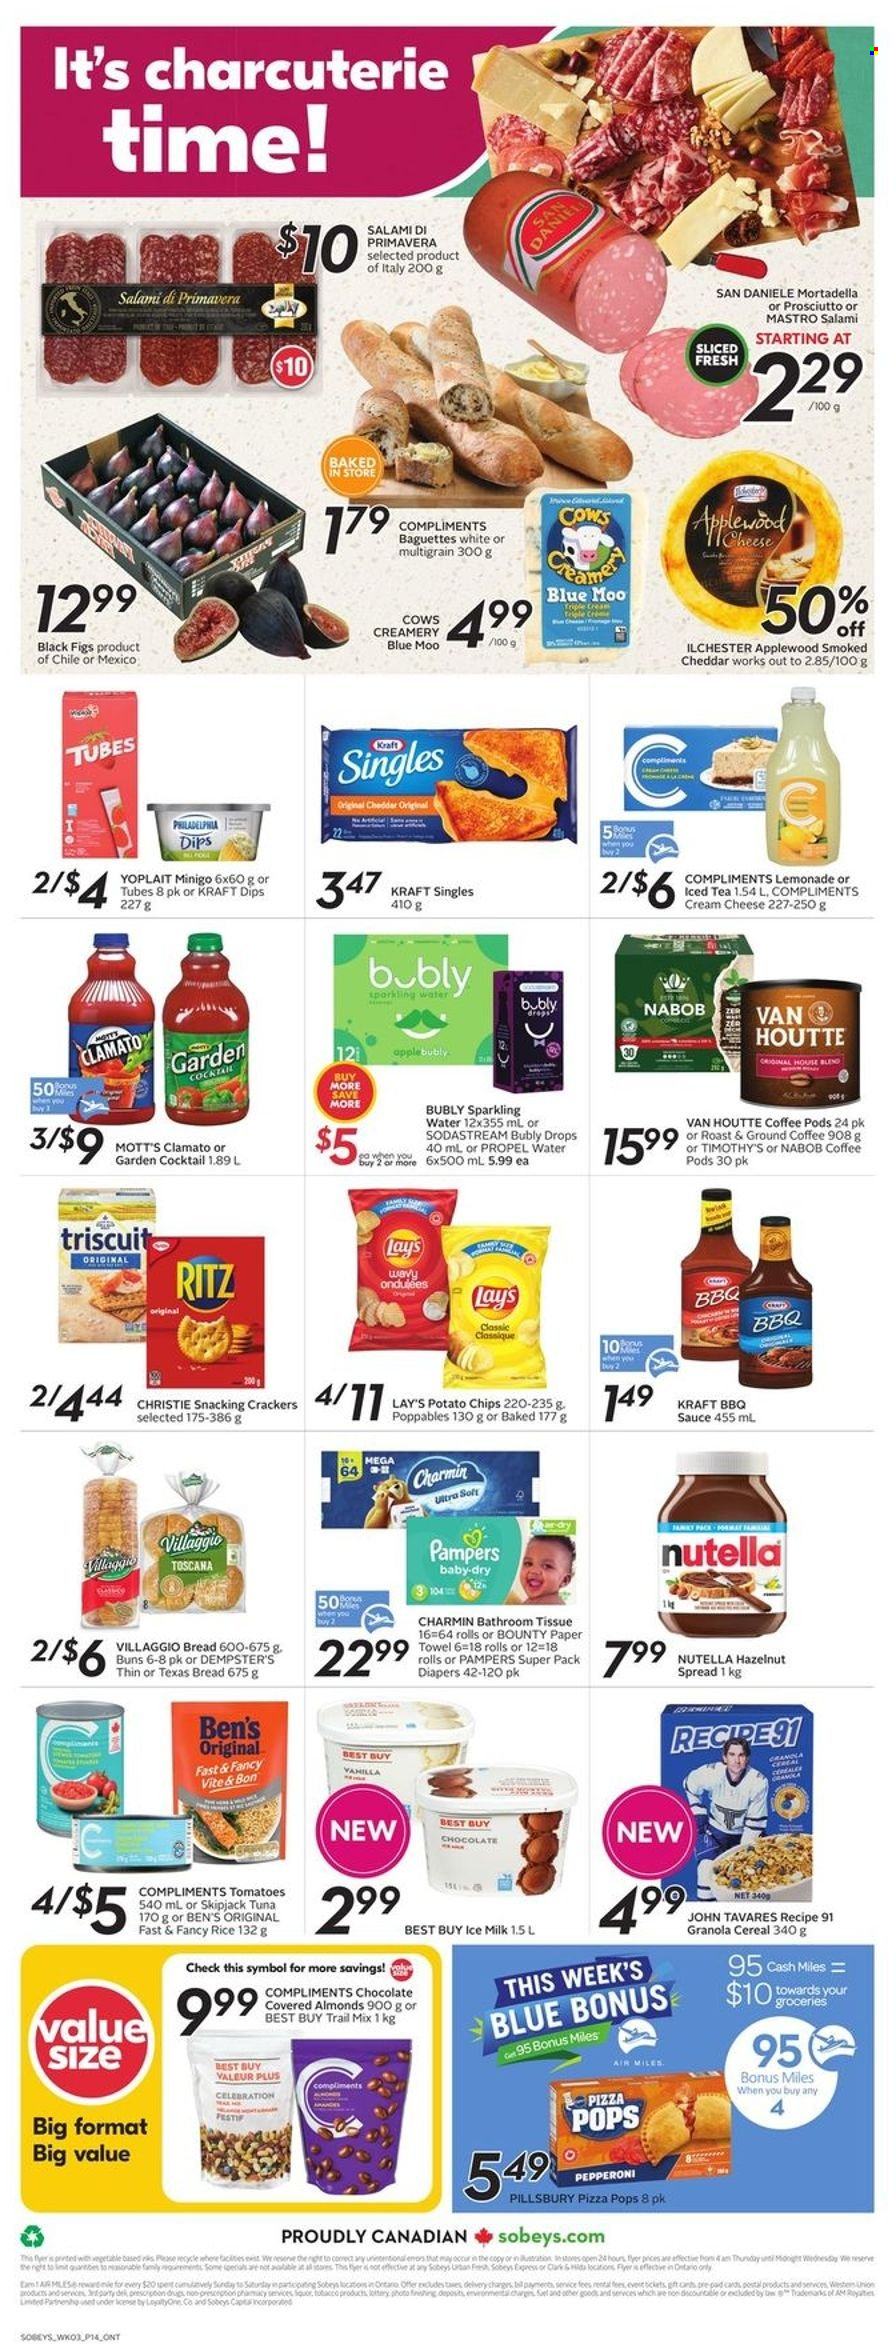 thumbnail - Sobeys Flyer - May 19, 2022 - May 25, 2022 - Sales products - bread, buns, figs, Mott's, tuna, pizza, sauce, Kraft®, mortadella, salami, pepperoni, cream cheese, sandwich slices, Kraft Singles, Yoplait, milk, Bounty, Celebration, crackers, RITZ, potato chips, chips, Lay’s, cereals, rice, BBQ sauce, hazelnut spread, almonds, trail mix, lemonade, ice tea, Clamato, coffee pods, ground coffee, nappies, bath tissue, paper towels, Charmin, baguette, granola, Pampers, Nutella. Page 4.